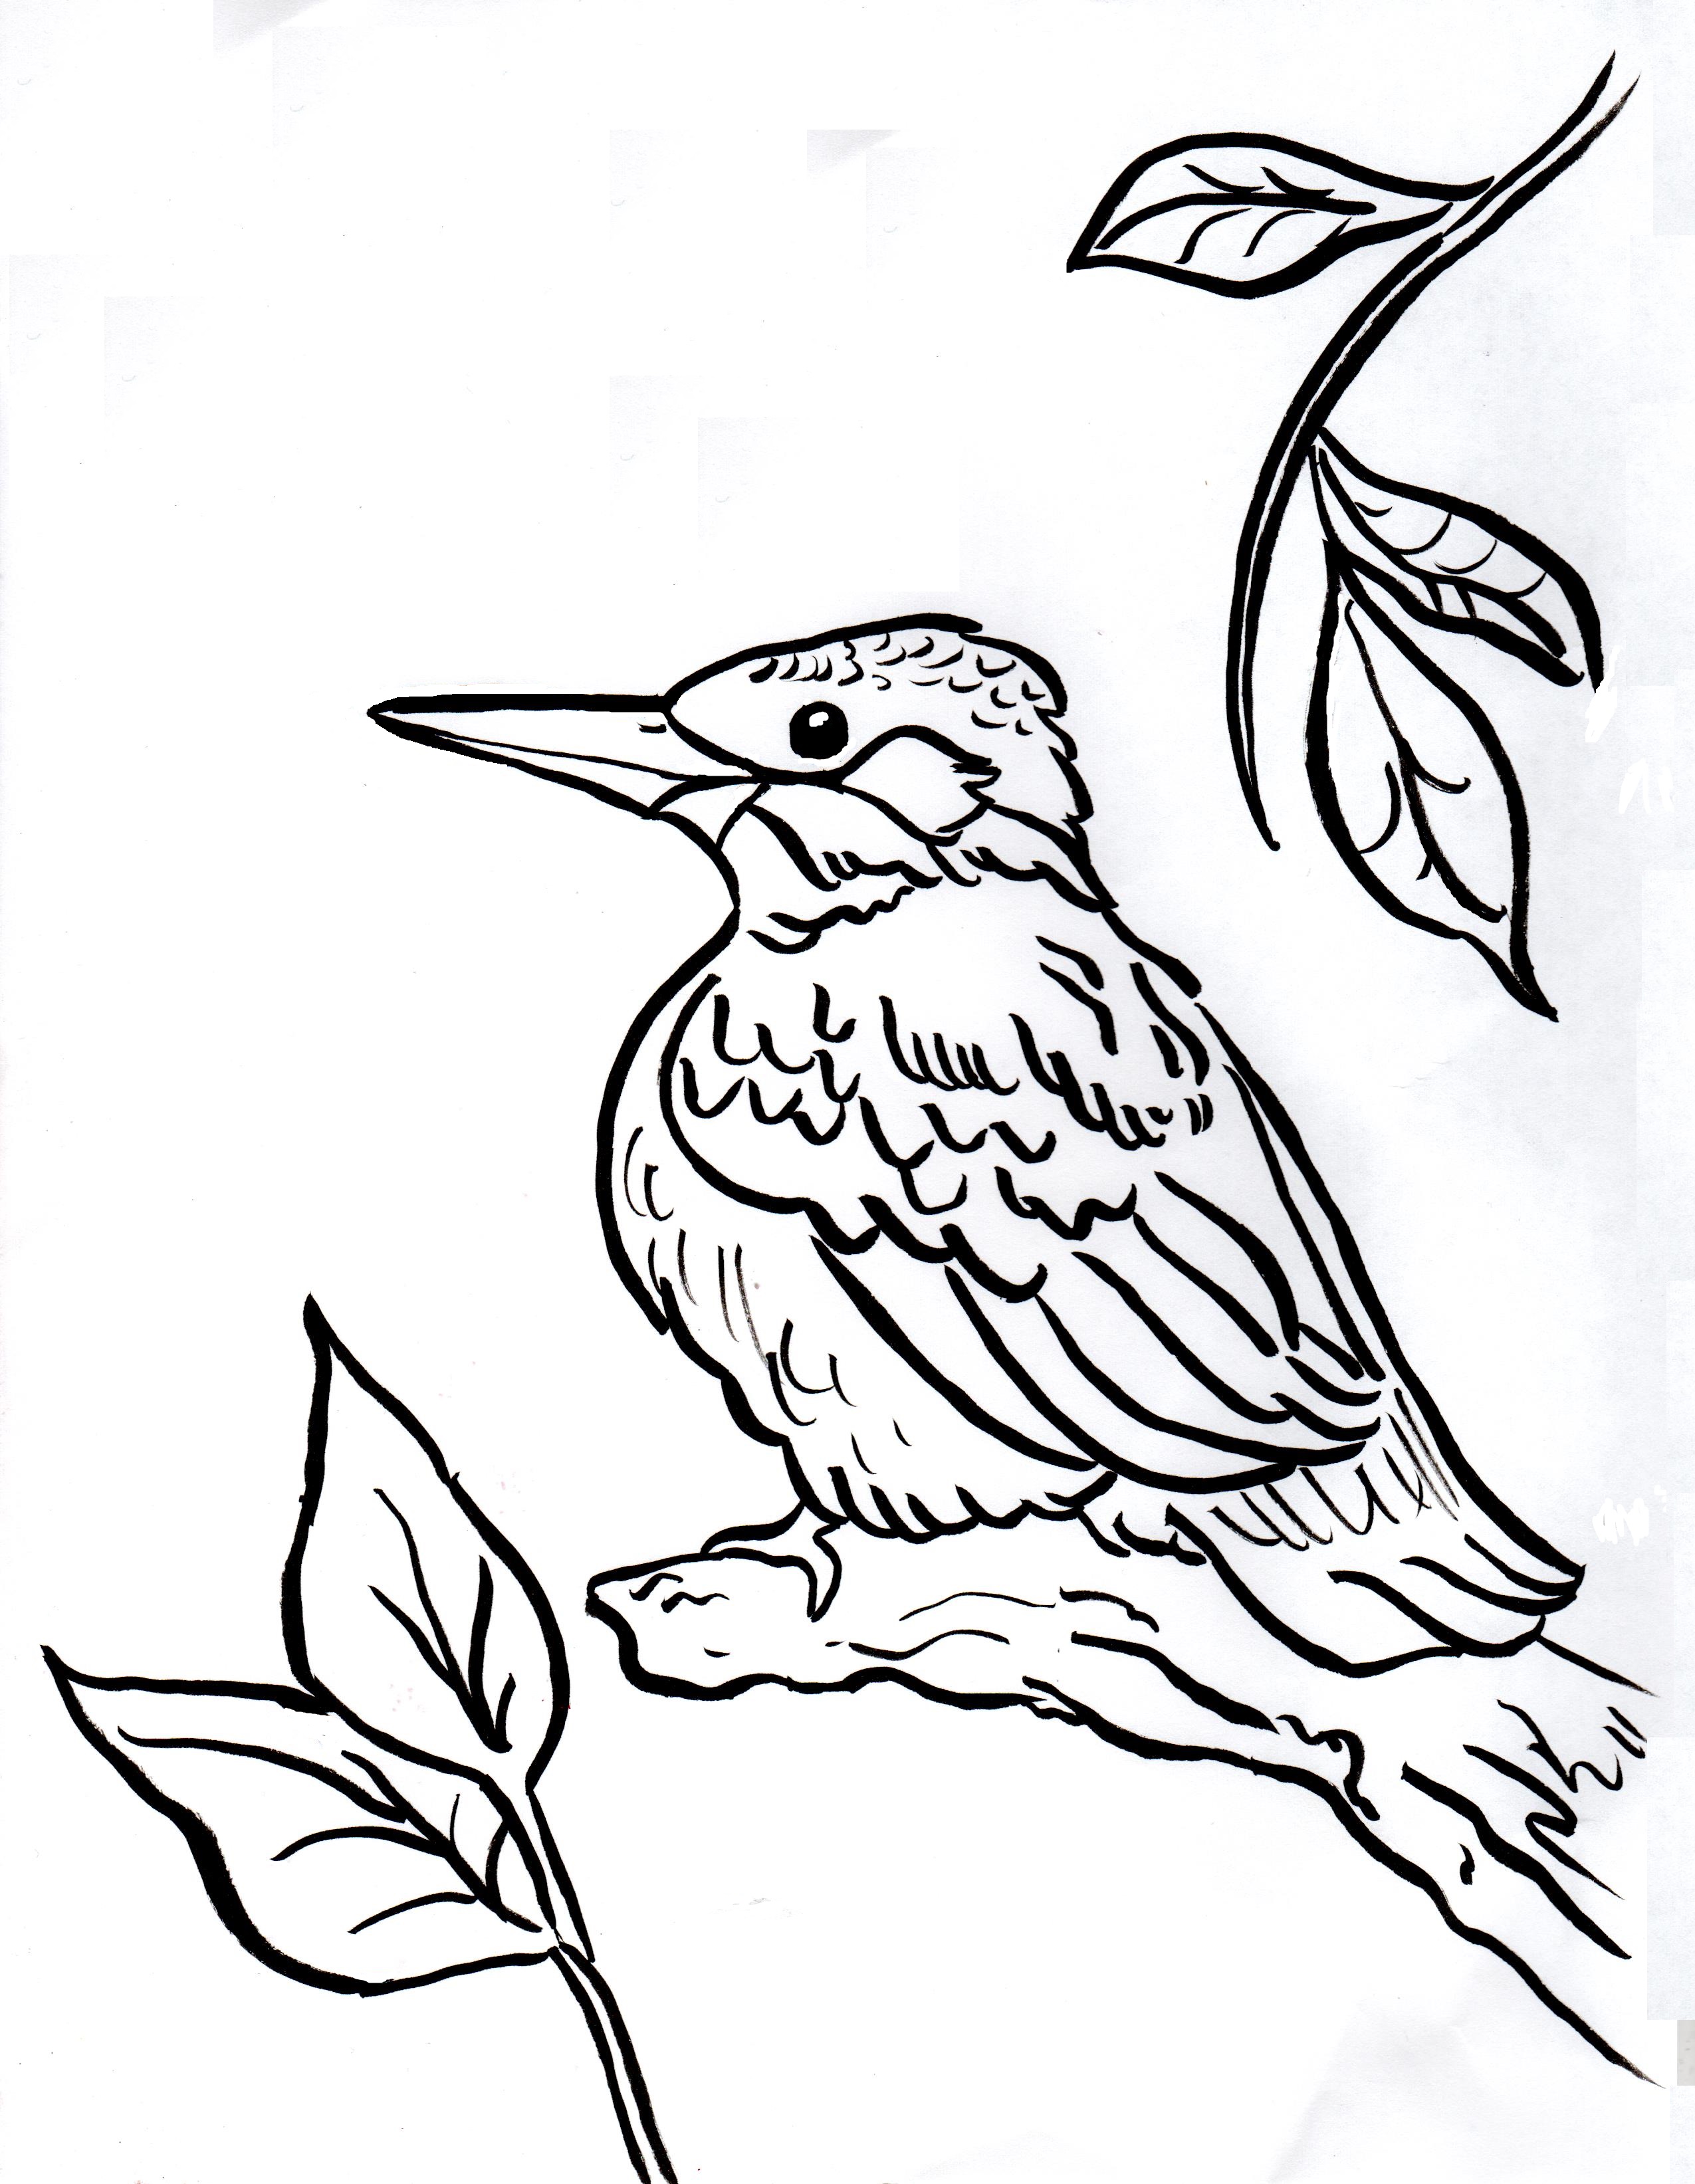 Kingfisher coloring, Download Kingfisher coloring for free 2019